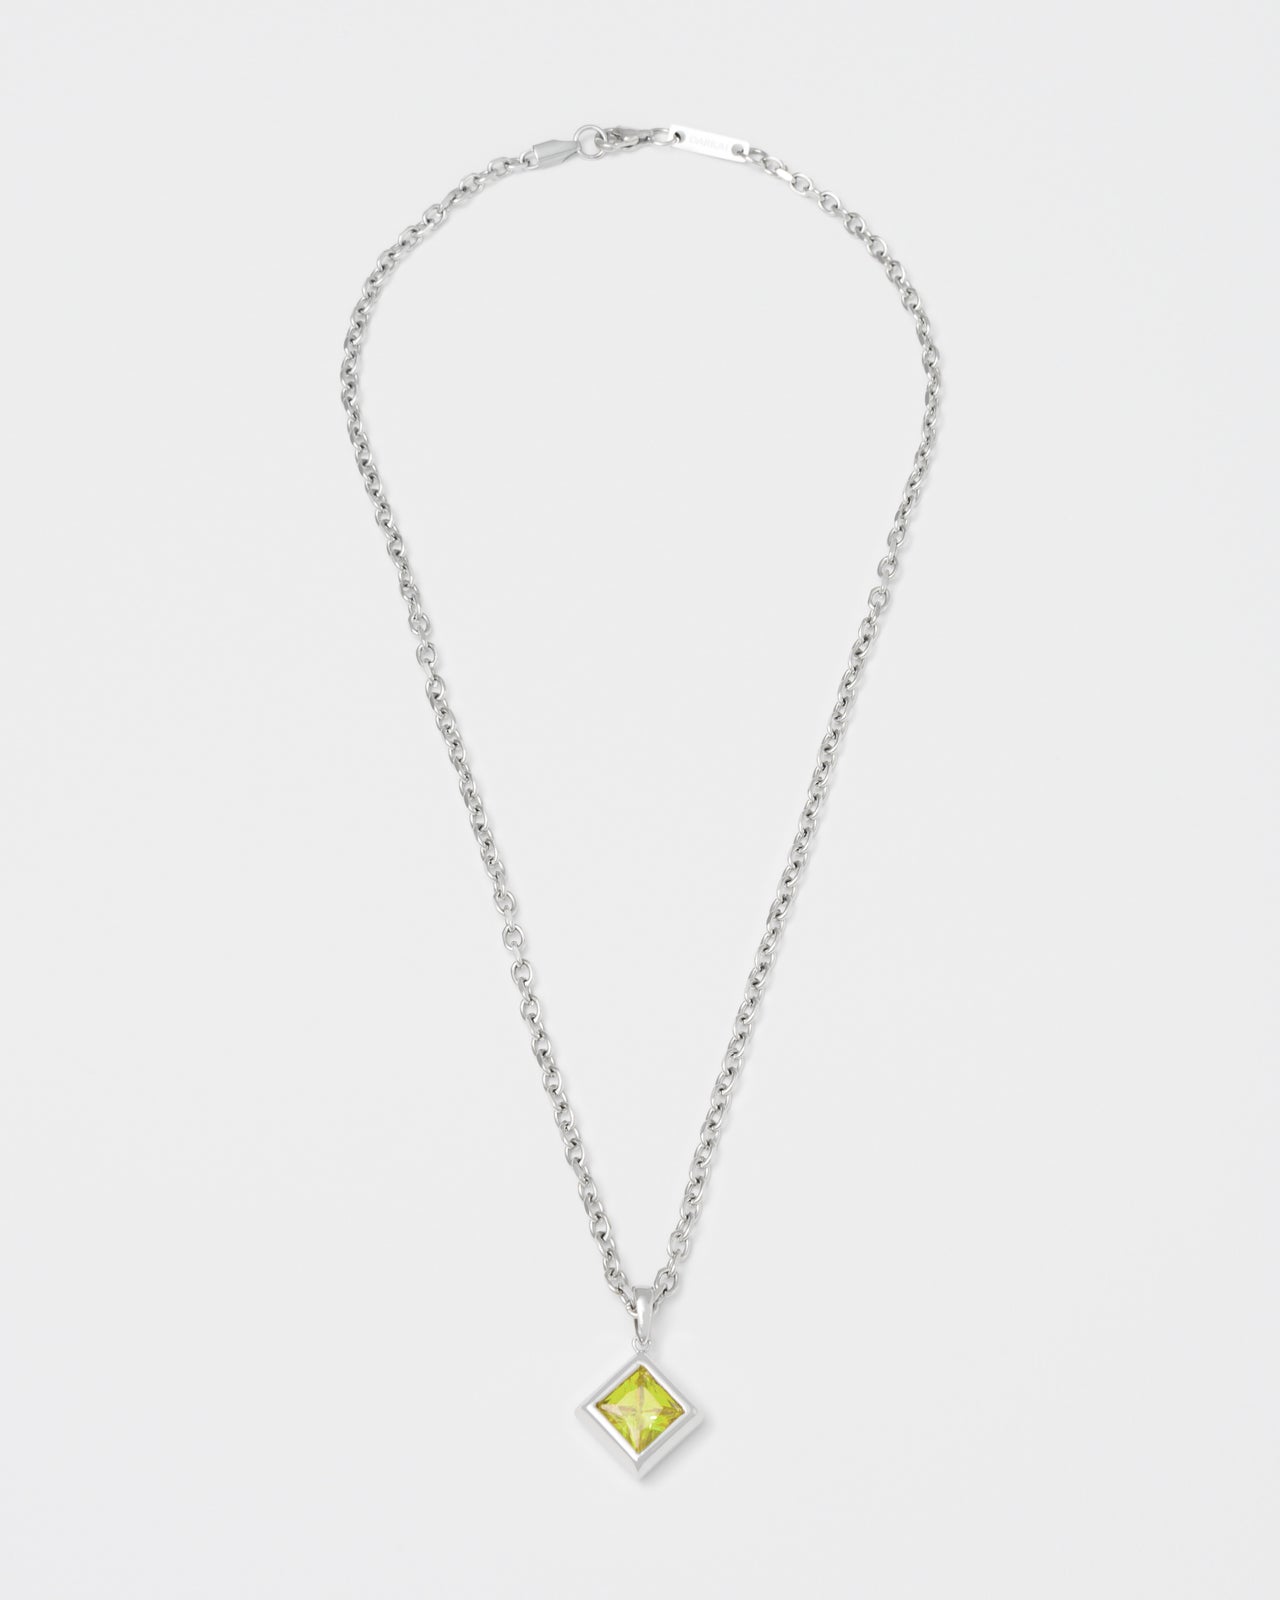 via savona pendant necklace with 18kt white gold coating rhombus shaped princess-cut stone in olive